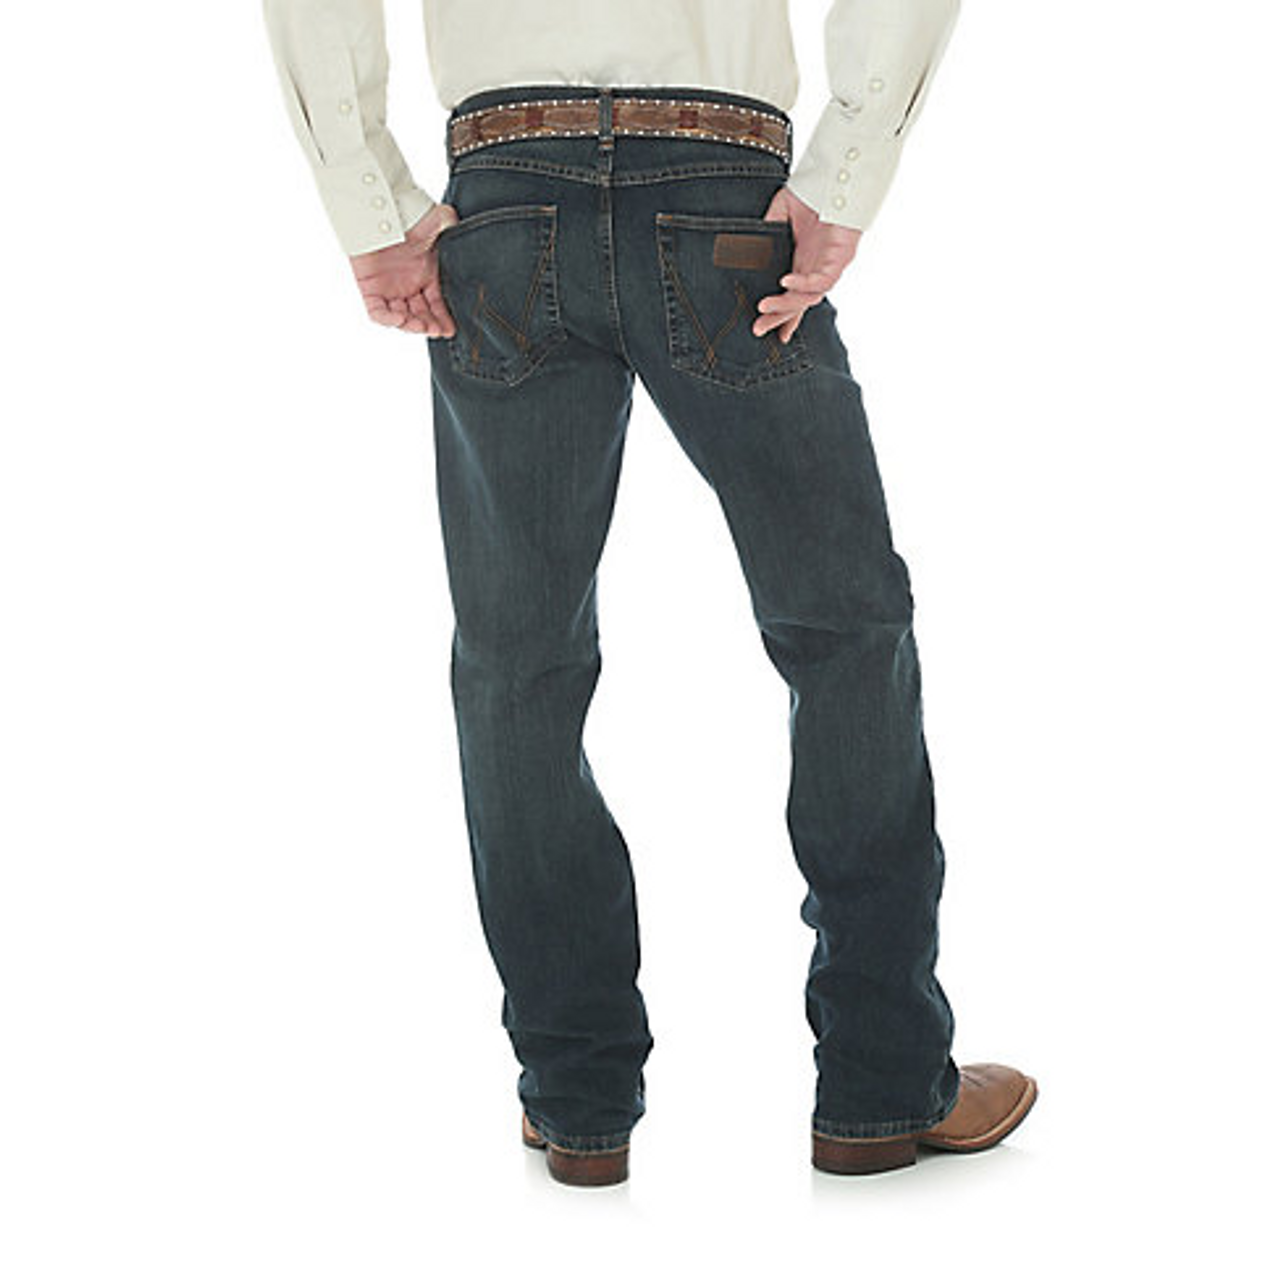 Wrangler Mens Jeans - 20X - Advanced Comfort 02 Competition - Root Beer ...